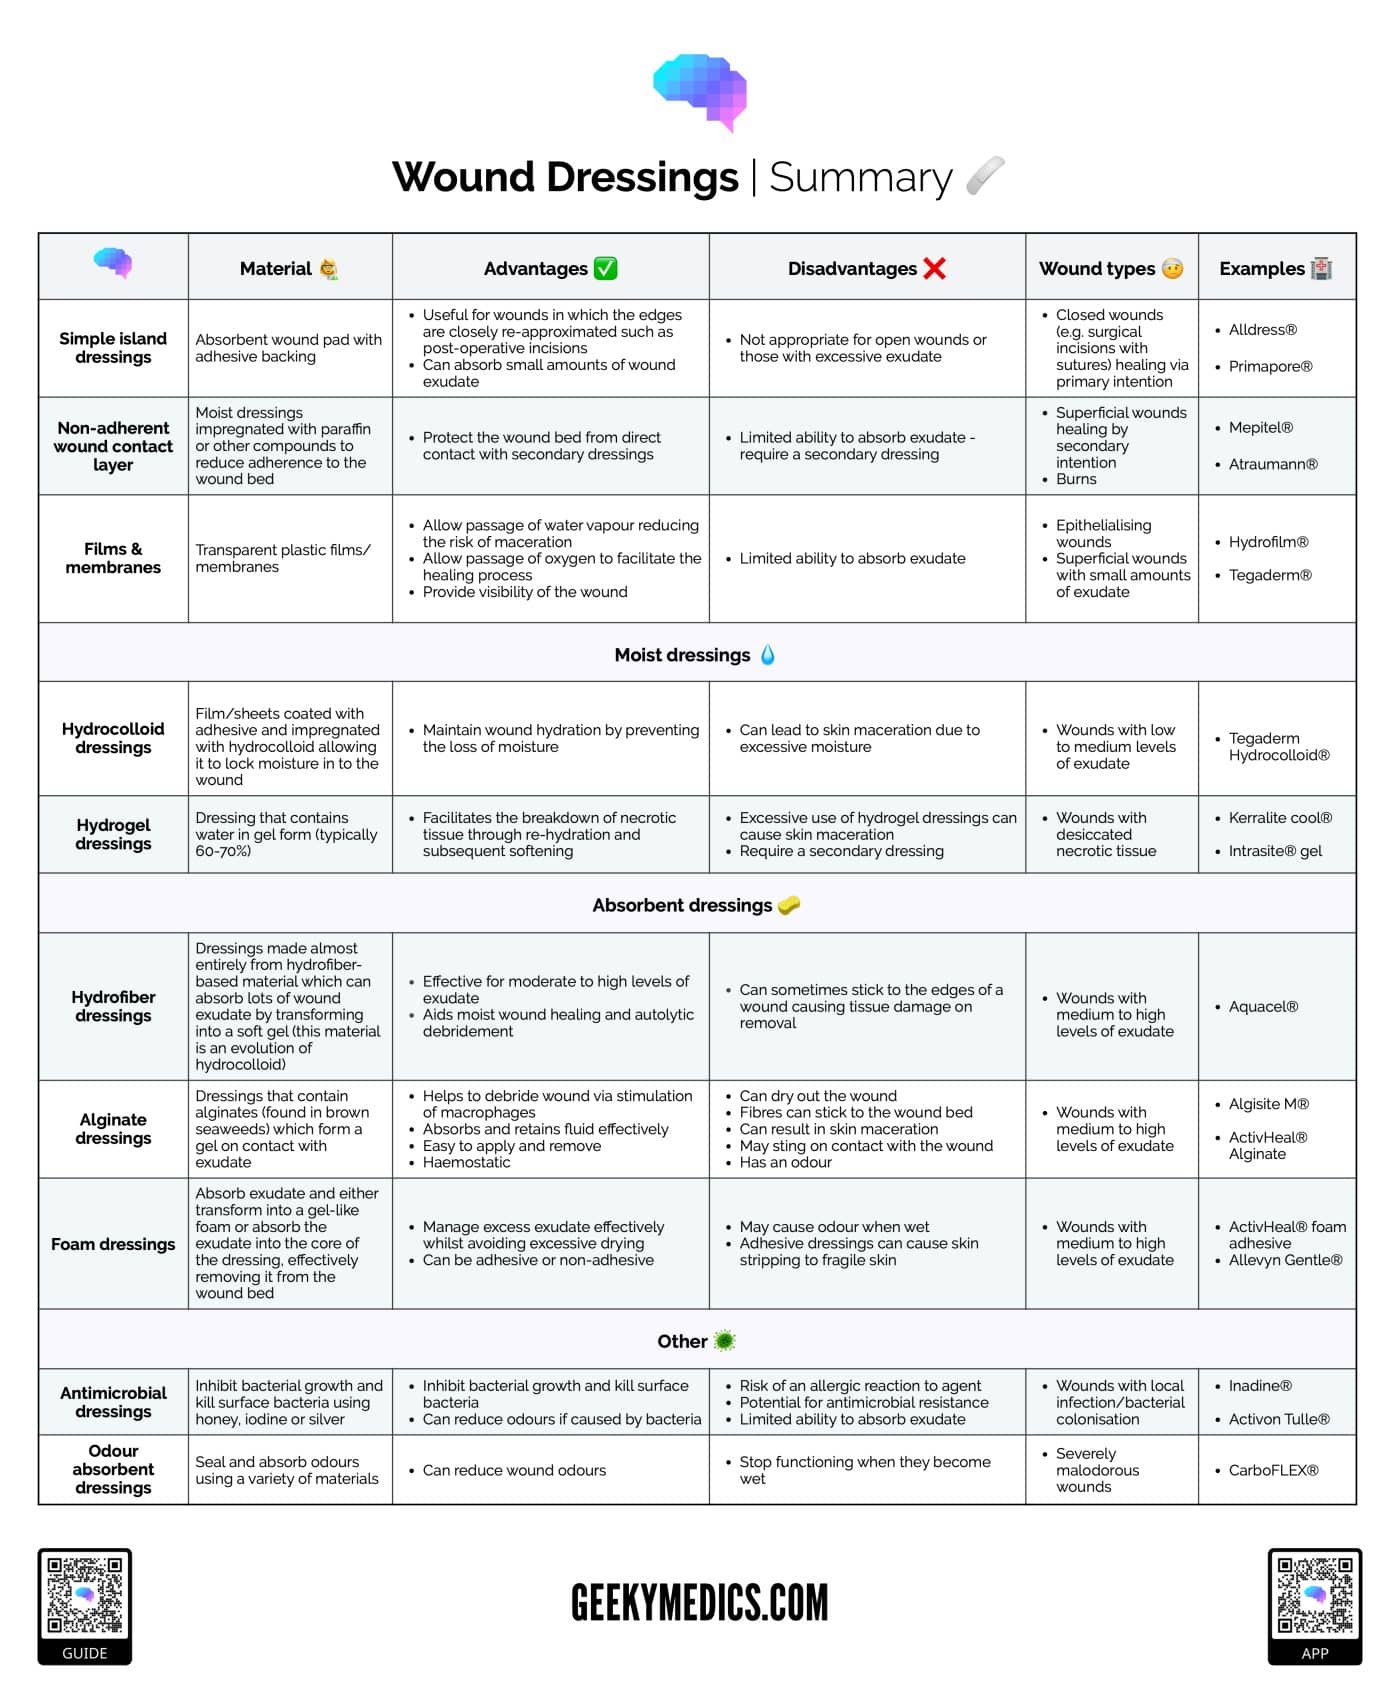 Wound Dressing Types - OSCE Guide | Geeky Medics